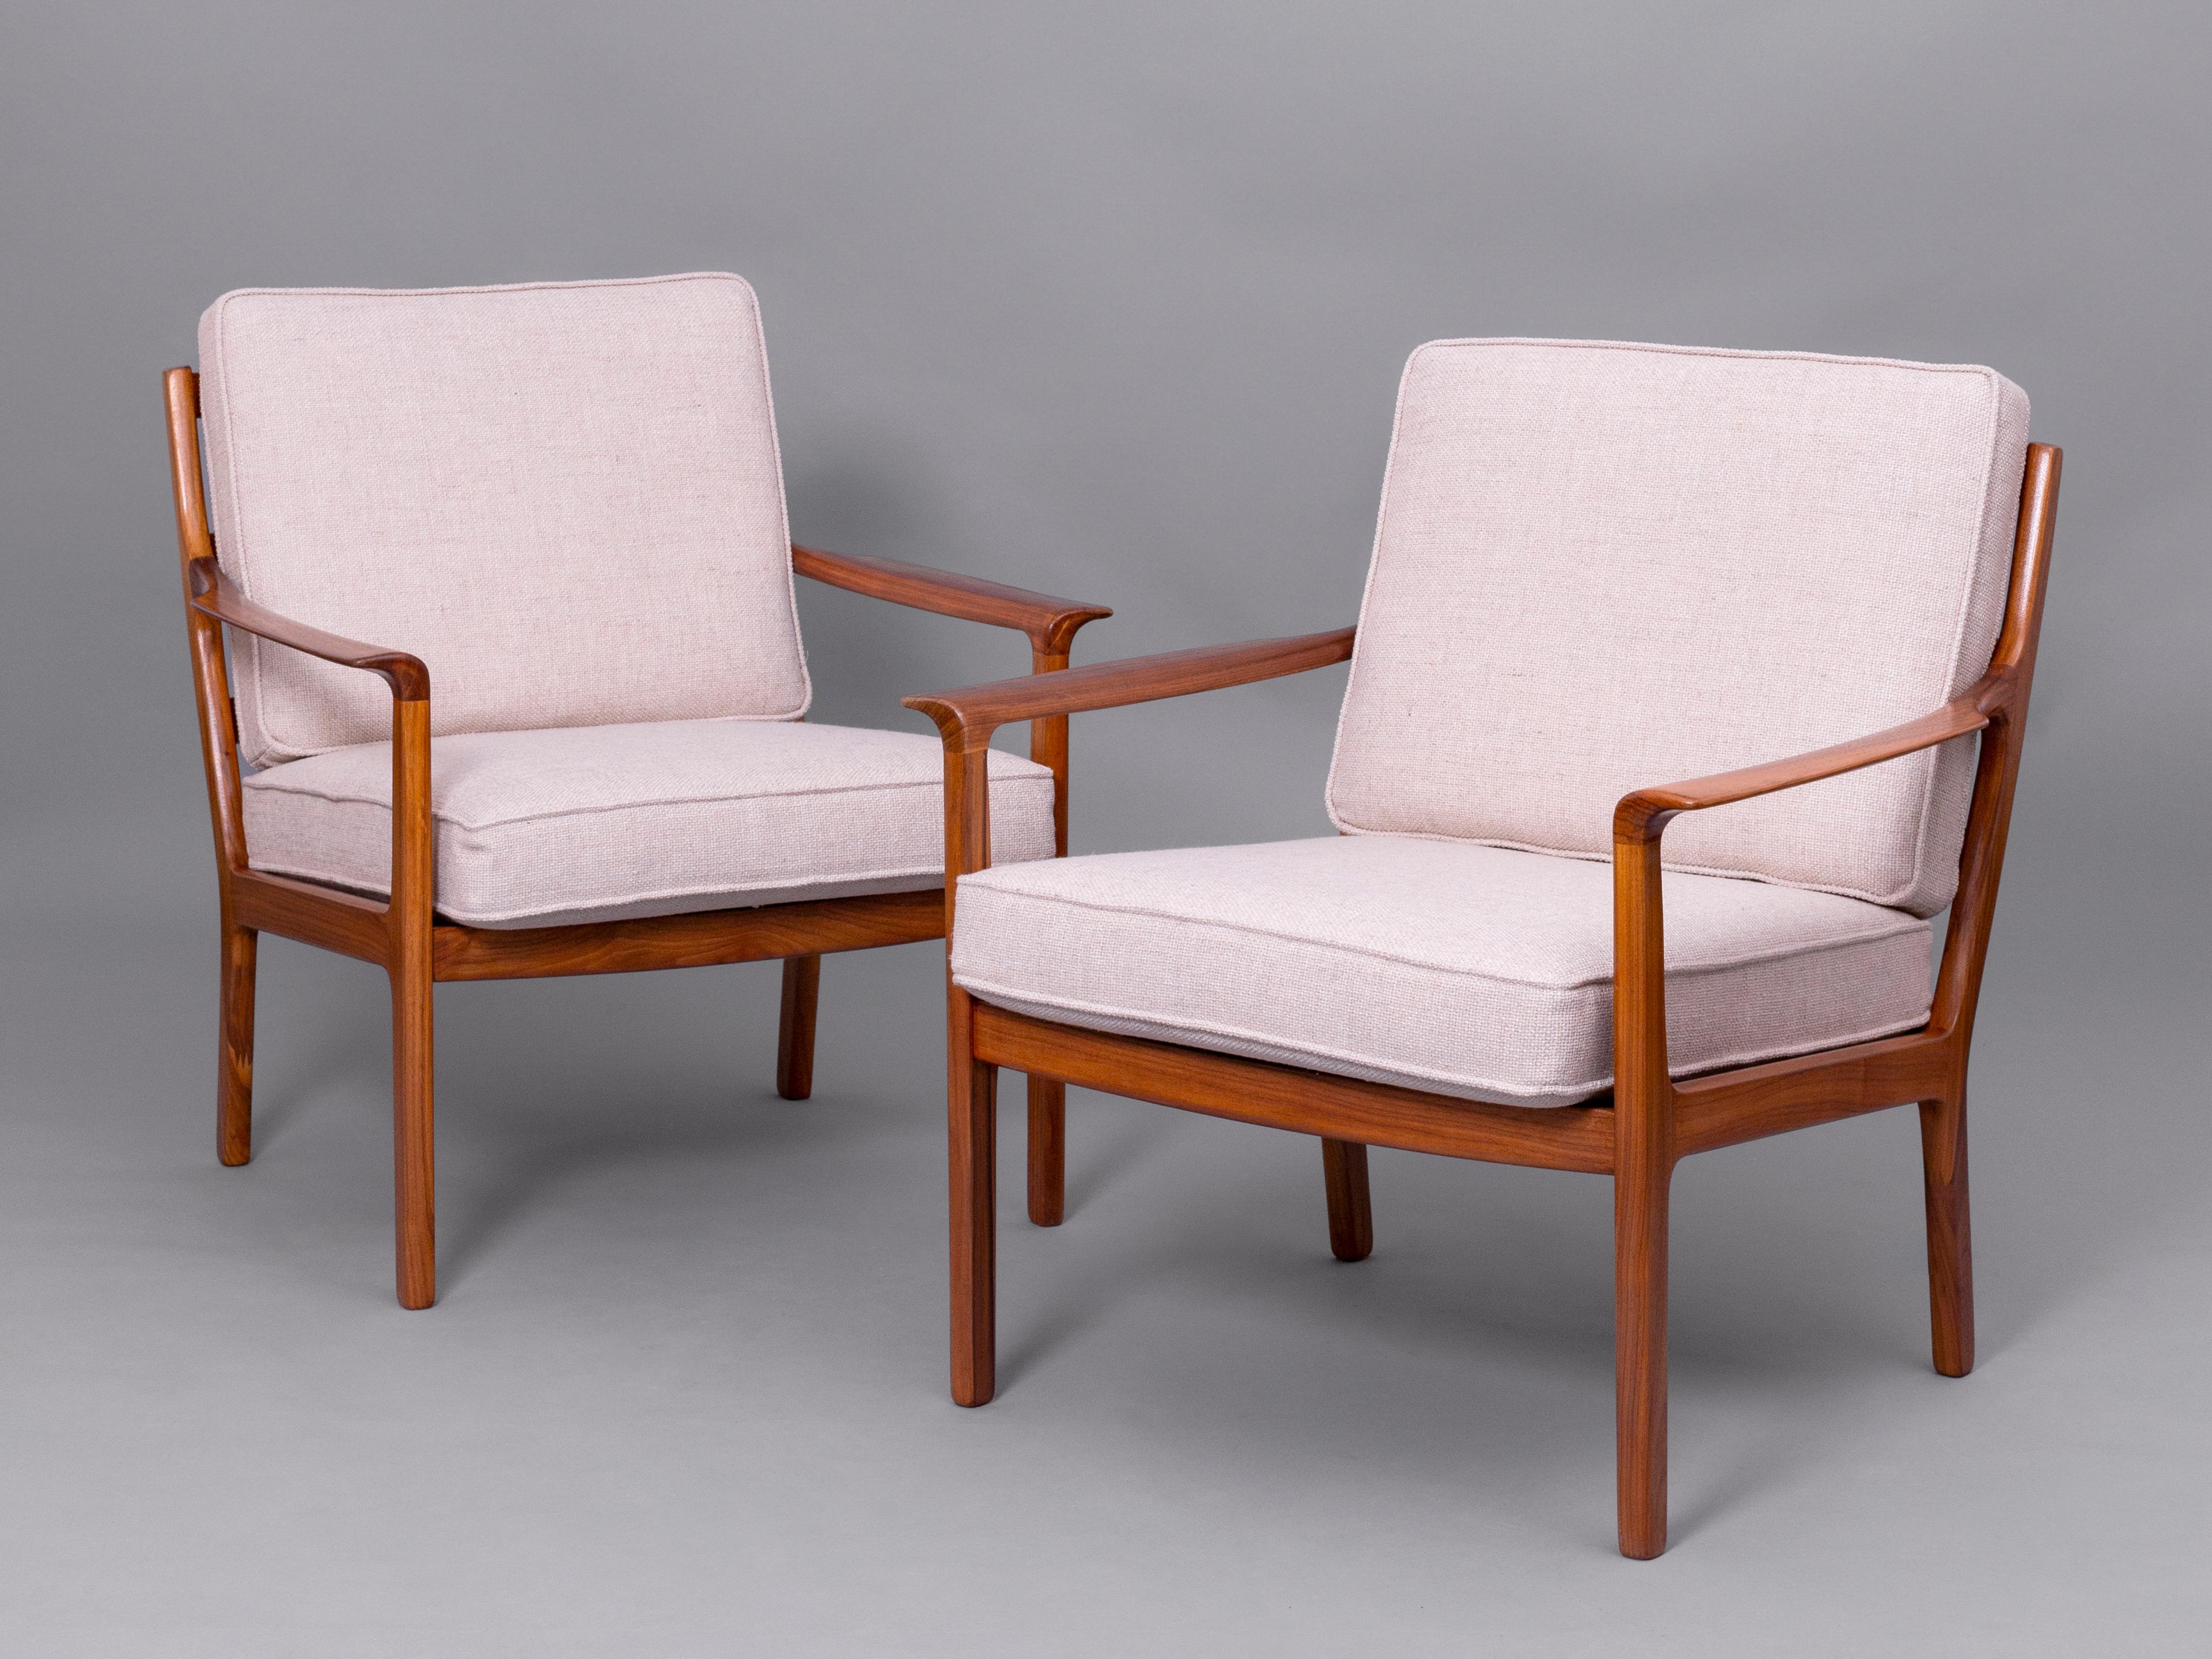 Pair of walnut armchairs, model '935', designed by Fredrik A. Kayser for Vatne Møbler. Norway, 1960s. 

This pair of armchairs has been completely restored and the cushions renewed. 
The simple structure has been designed respecting typical Mid